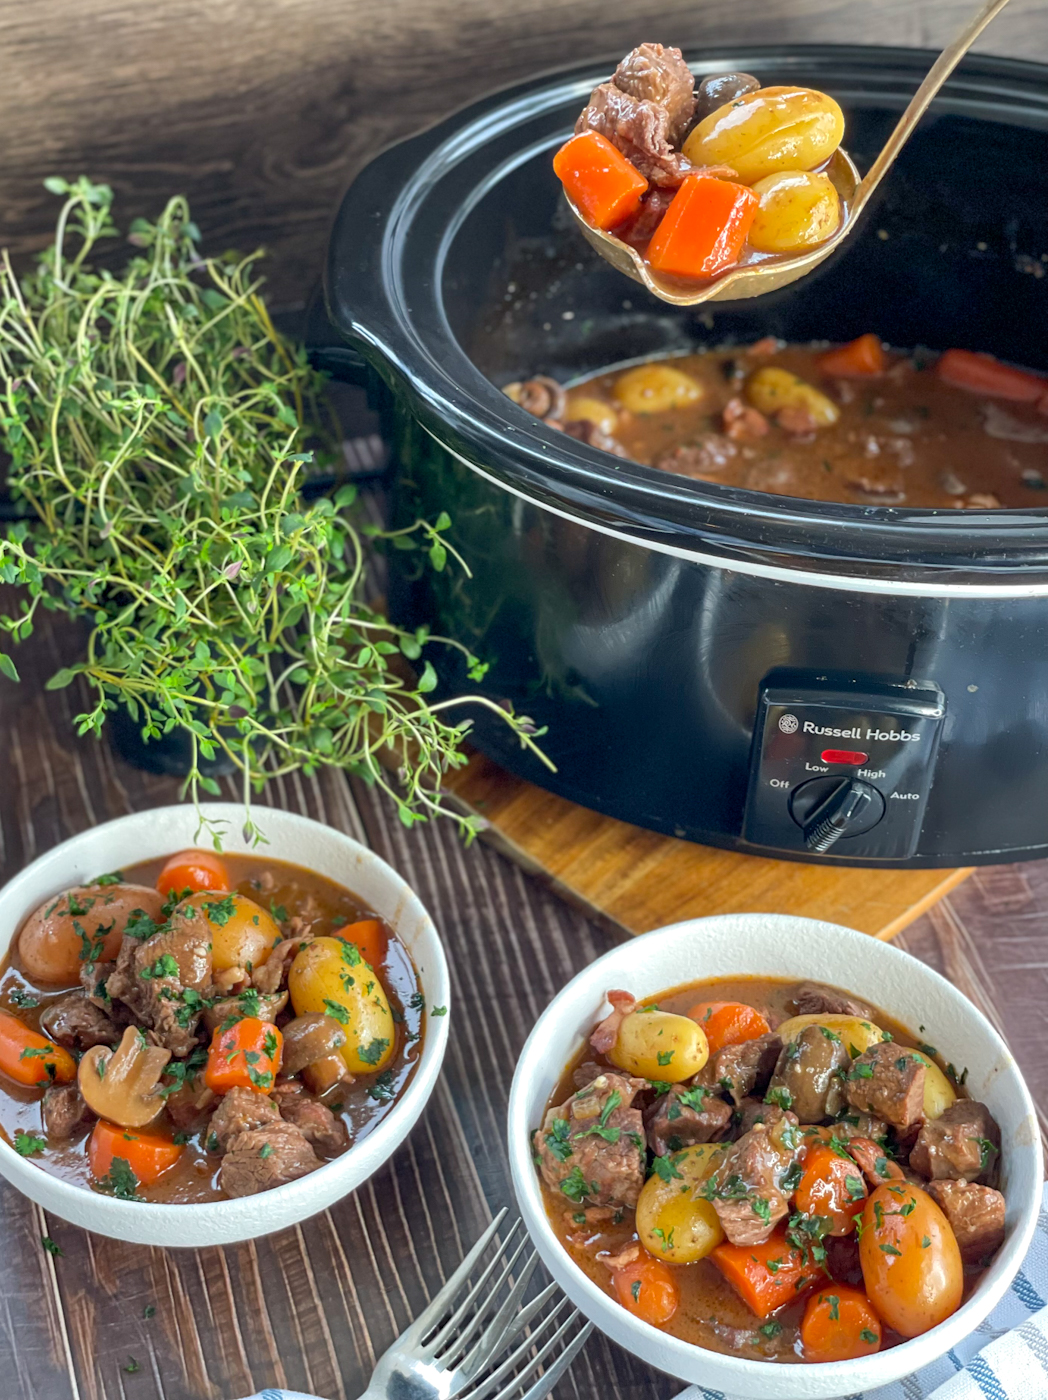 Slow cooker full of Beef Bourguignon with vegetables